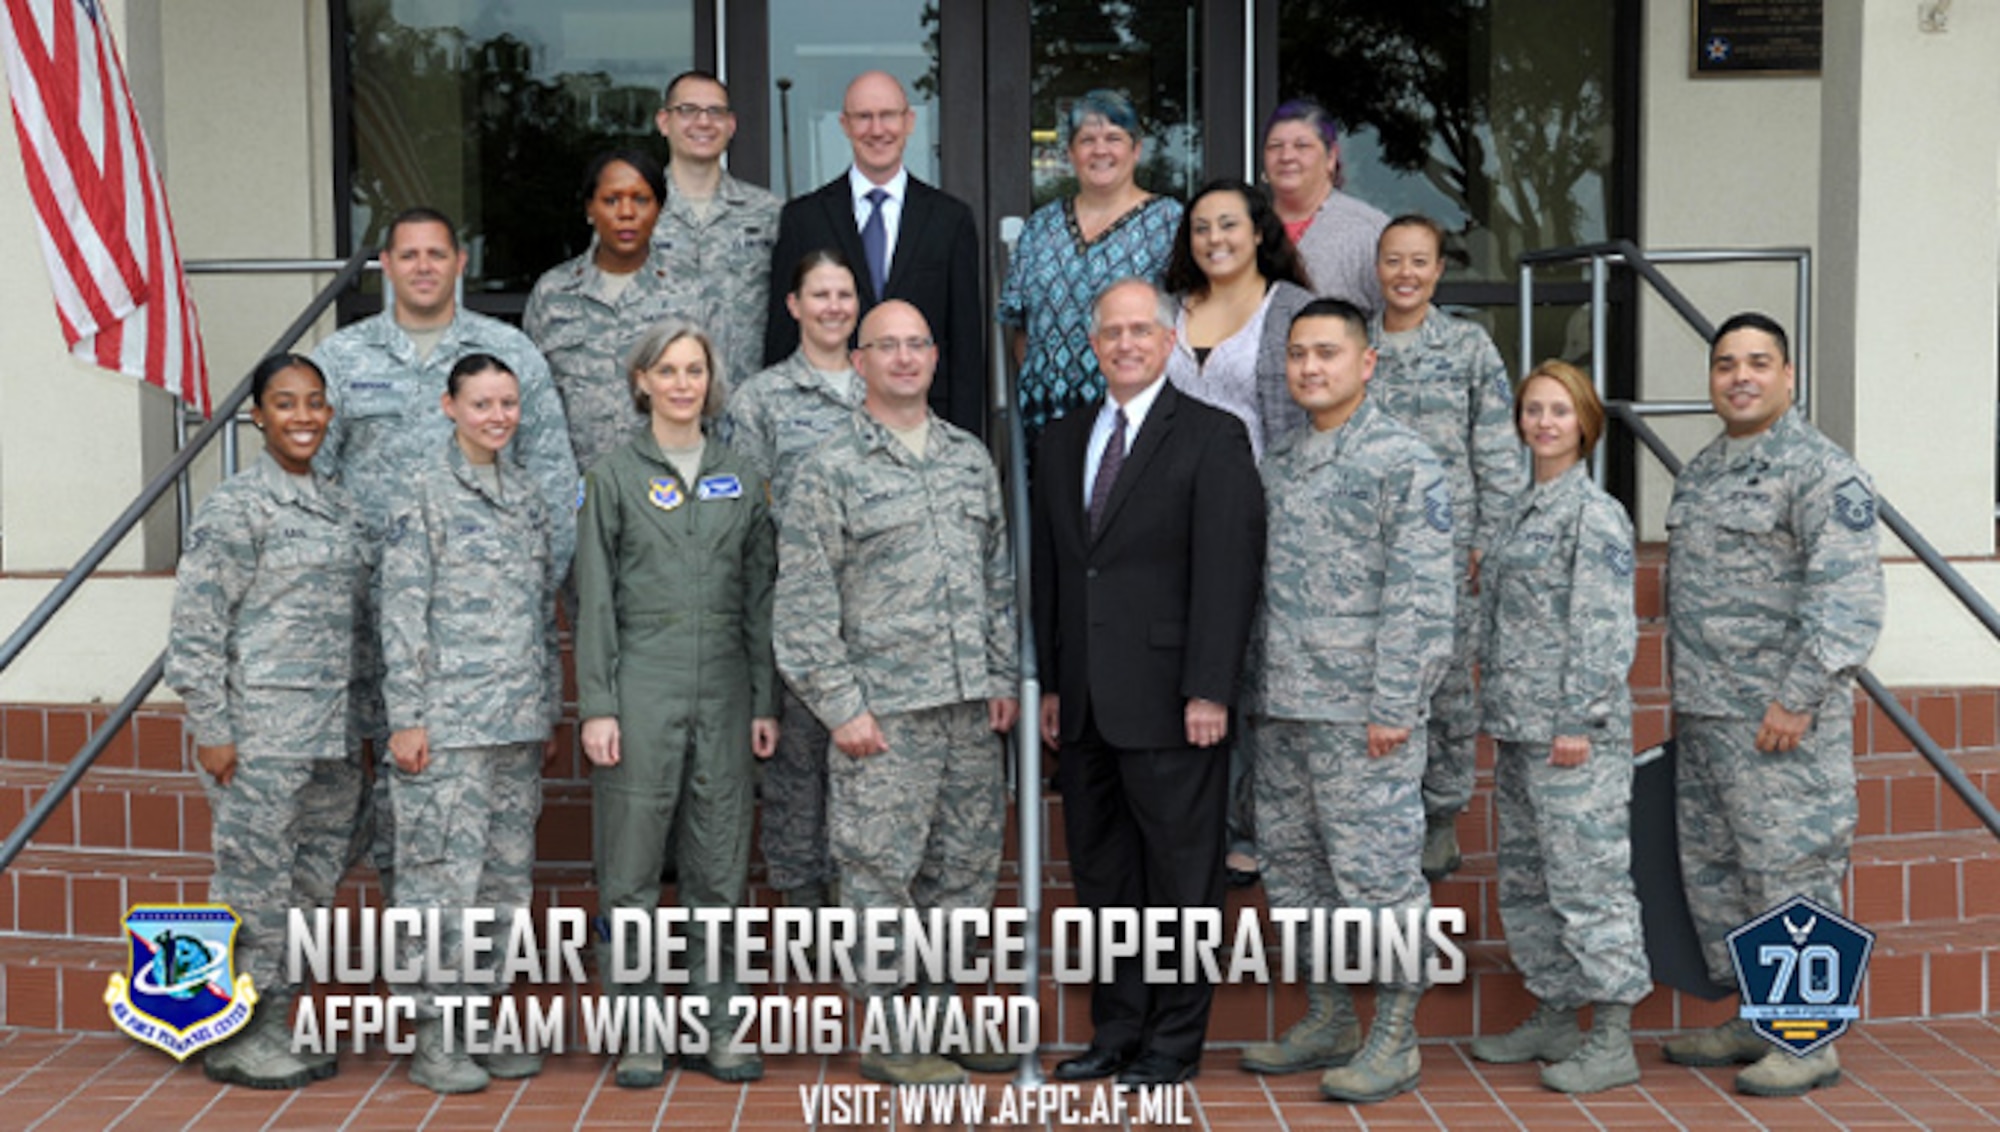 Air Force officials recently announced the winners of the 2016 Nuclear Deterrence Operations, and Nuclear and Missile Operations Awards. Among the distinguished recipients was the Air Force Personnel Center’s Personnel Reliability Program Administrative Qualifications Cell as the winner of the 2016 NDO Team of the Year. (U.S. Air Force courtesy photo)